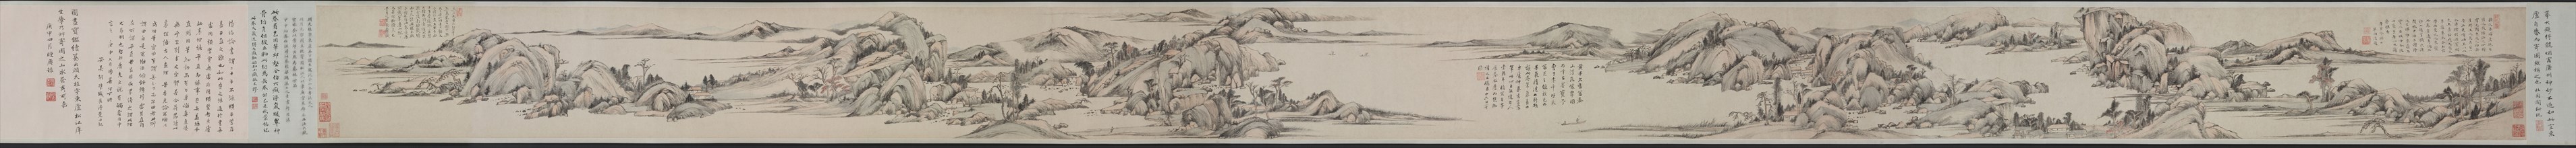 Landscape in the Style of Huang Gongwang, 1649. Gu Tianzhi (Chinese, active mid-1600s). Handscroll,